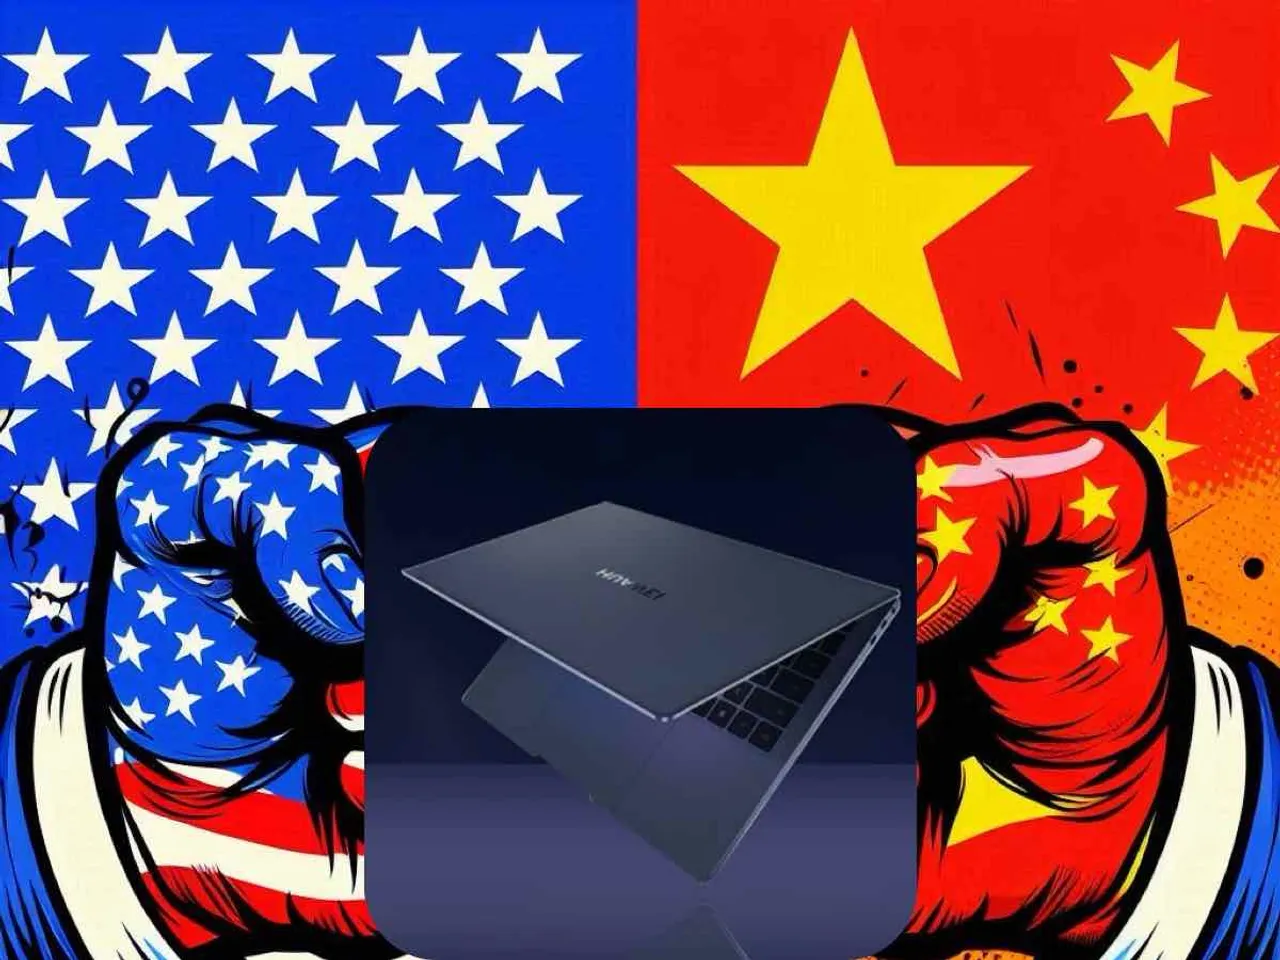 The US-China Tech Rift Deepens as Huawei’s MateBook X Pro Sparks Congressional Scrutiny